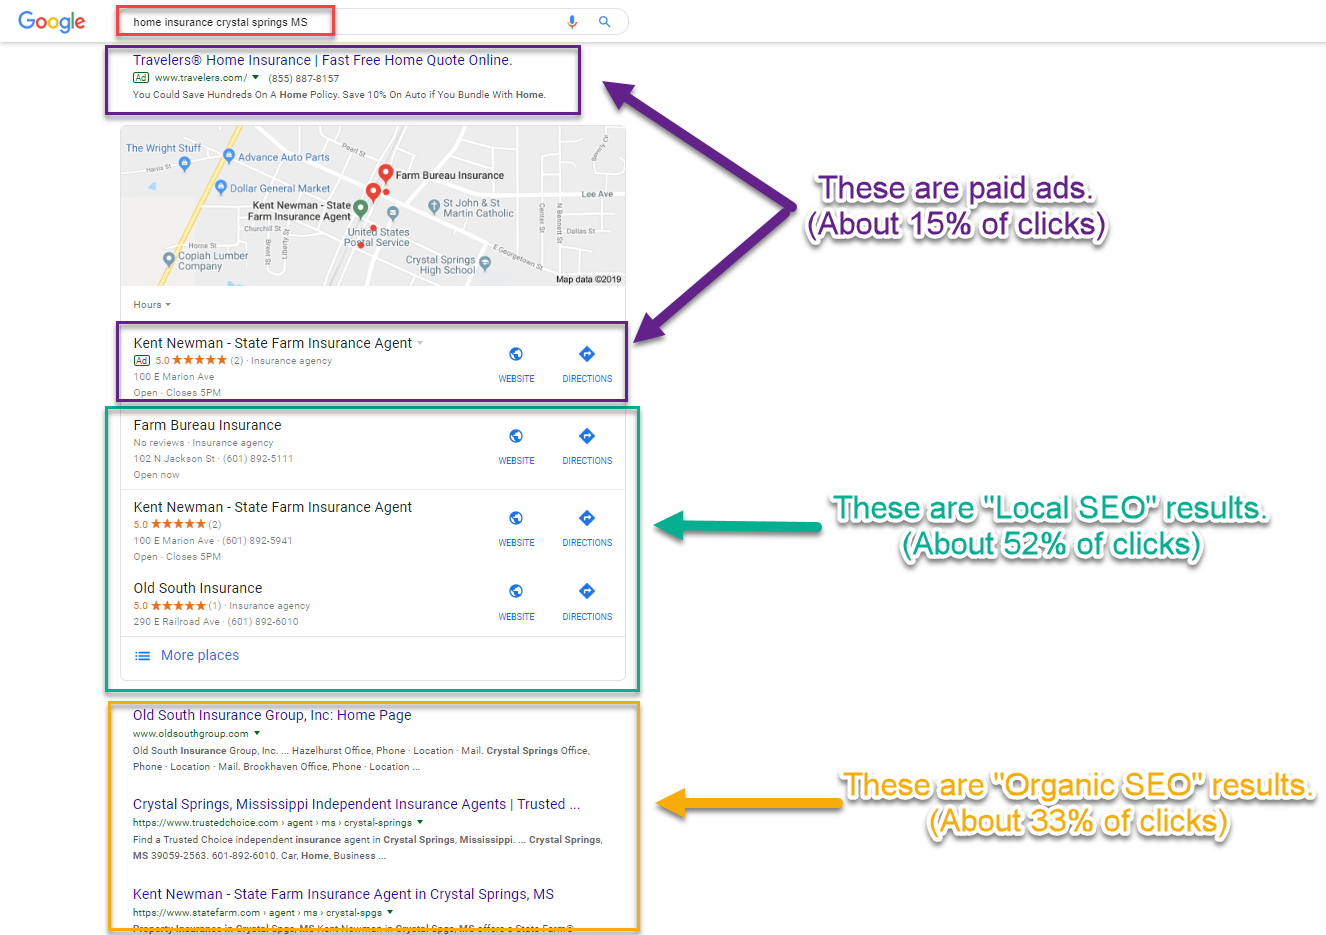 SEO Areas of the Results Page